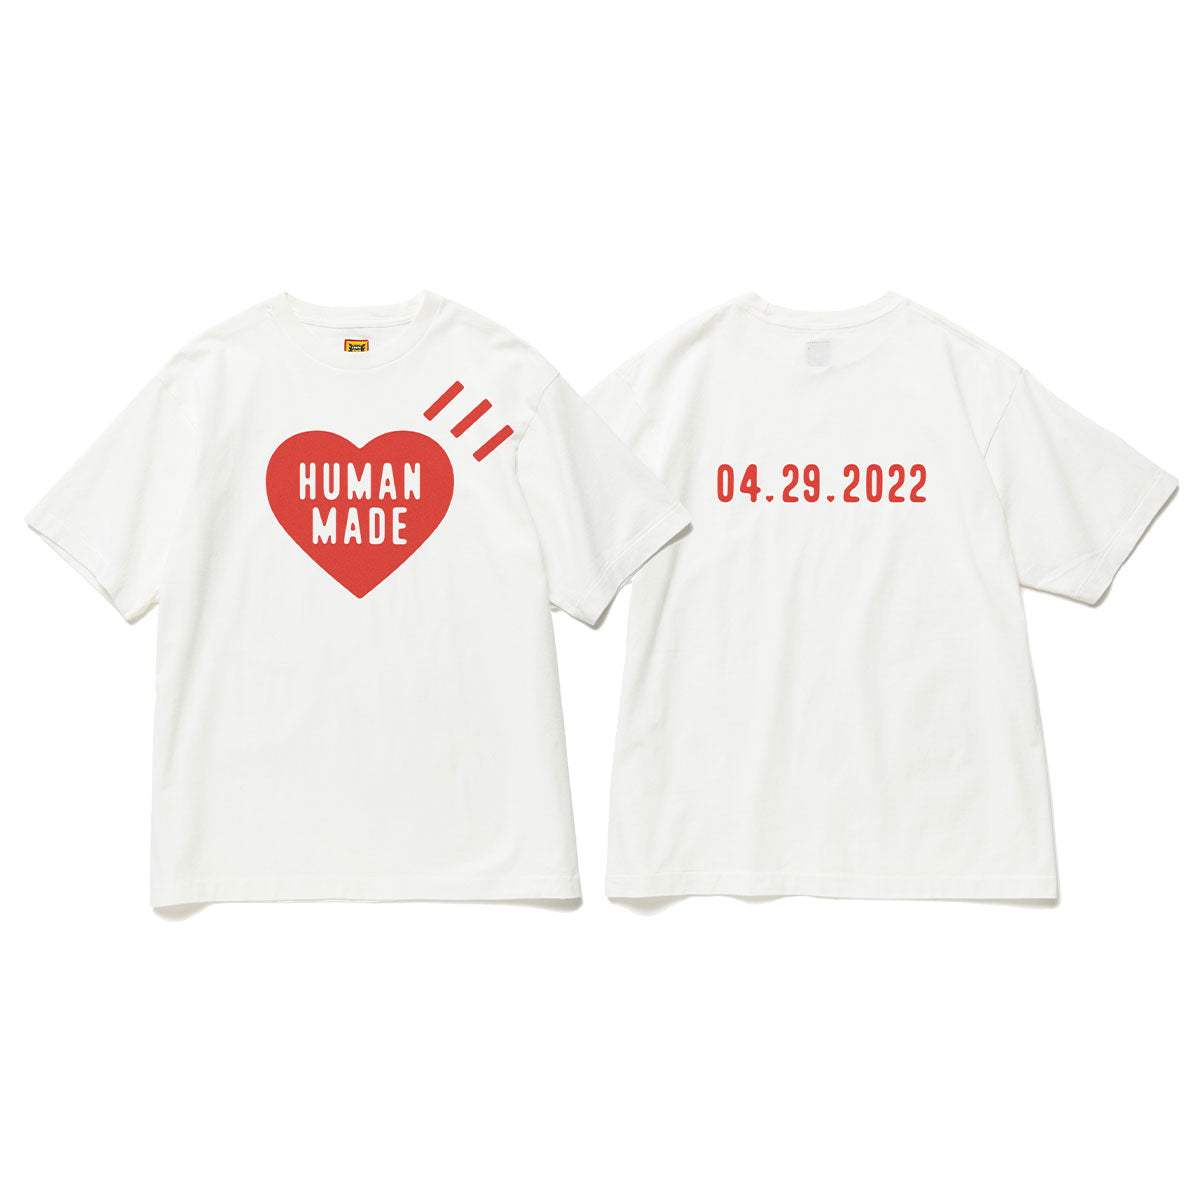 HUMAN MADE HEART T-SHIRT Tシャツ WHITE - Tシャツ/カットソー(半袖 